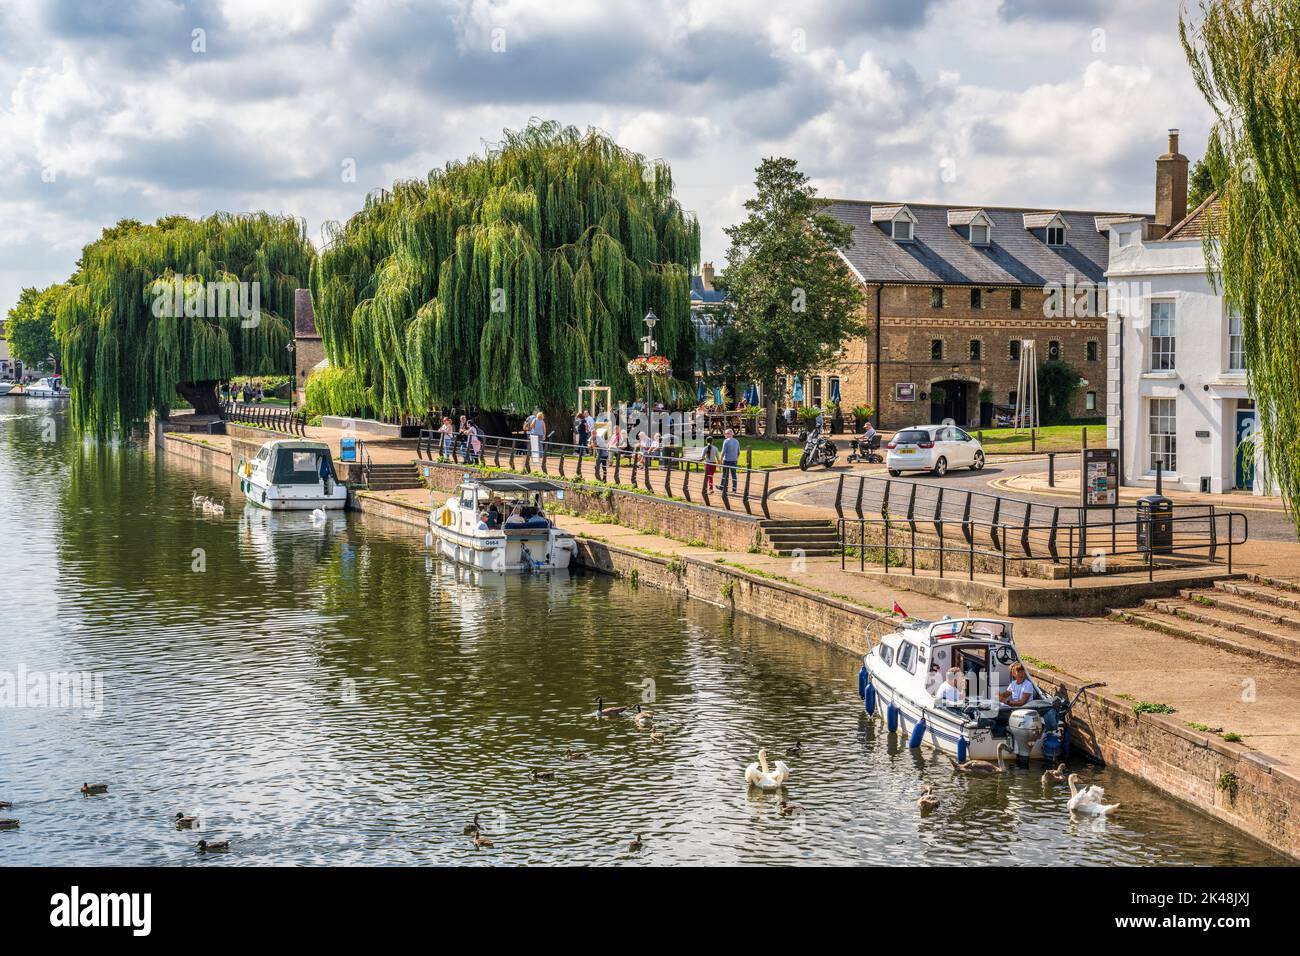 Boats moored on the River Great Ouse viewed from the Babylon Bridge in Ely, Cambridgeshire, England, UK Stock Photo